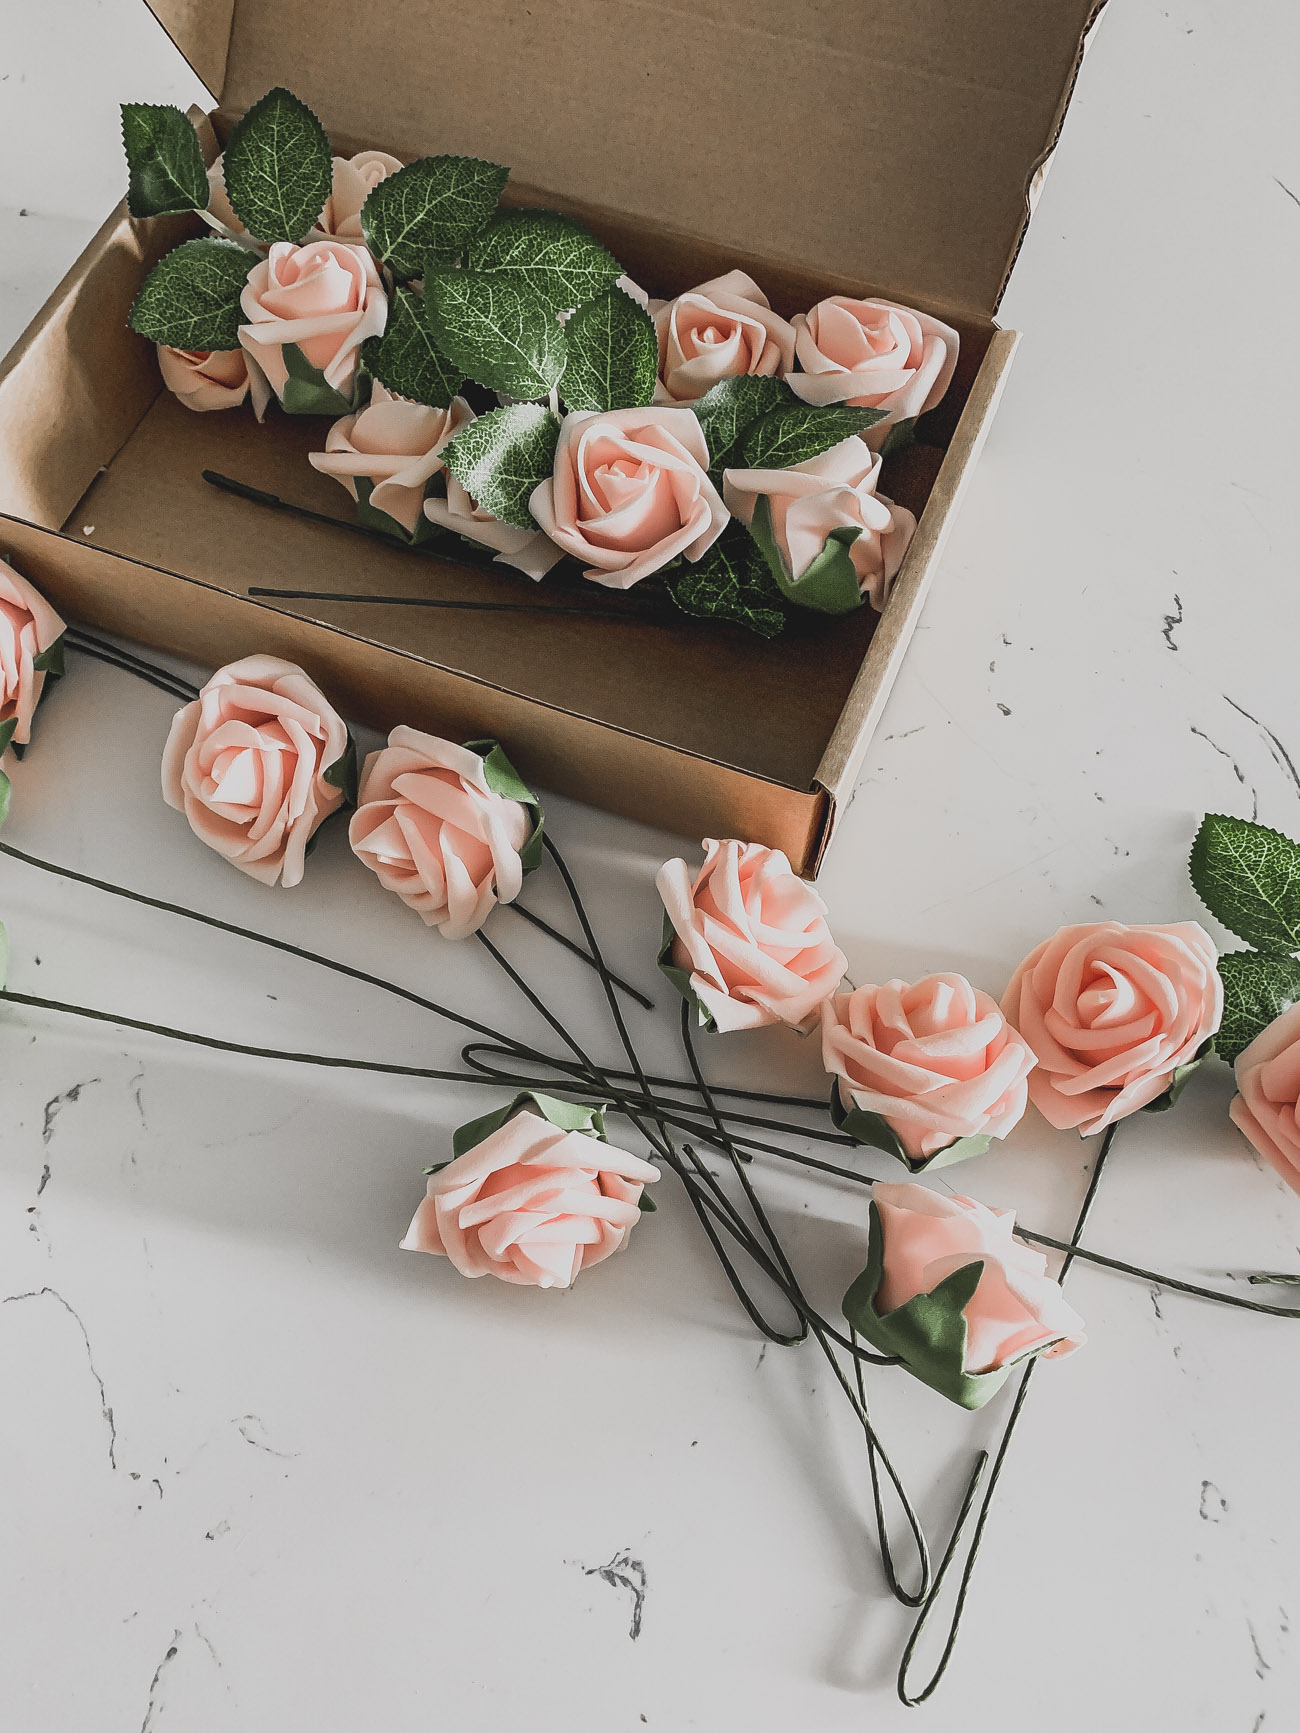 Faux Flowers for Decor | House Flowers | Blondie in the City by Hayley Larue